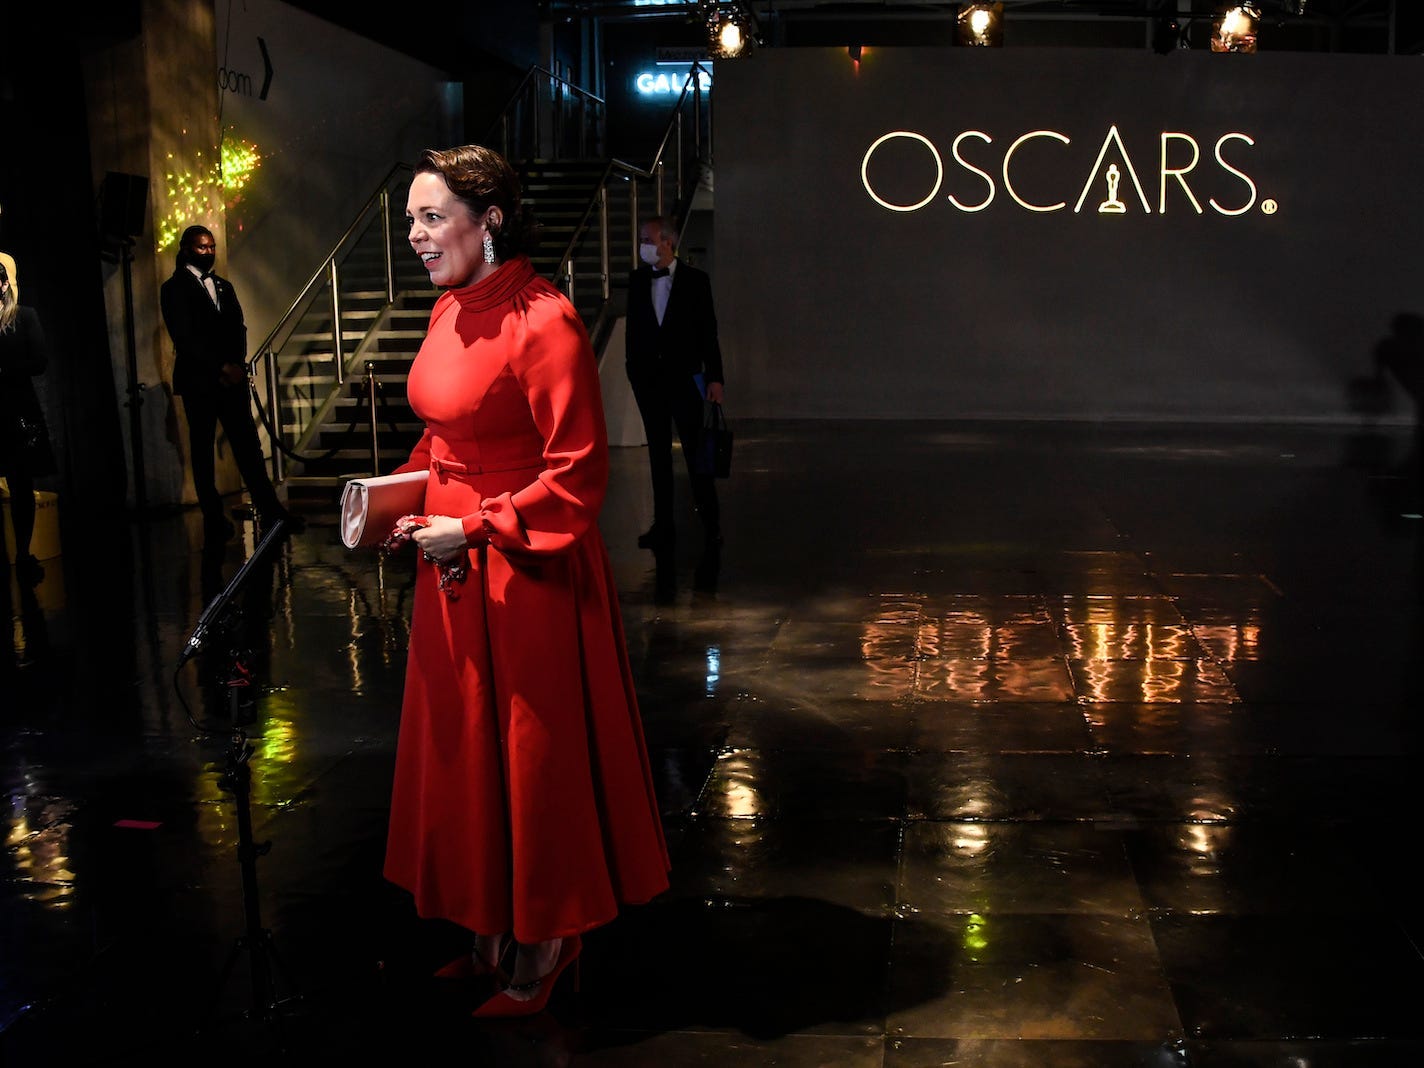 Olivia Colman is interviewed upon arrival at a screening of the Oscars on Monday, April 26, 2021 in London. (AP Photo/Alberto Pezzali, Pool)